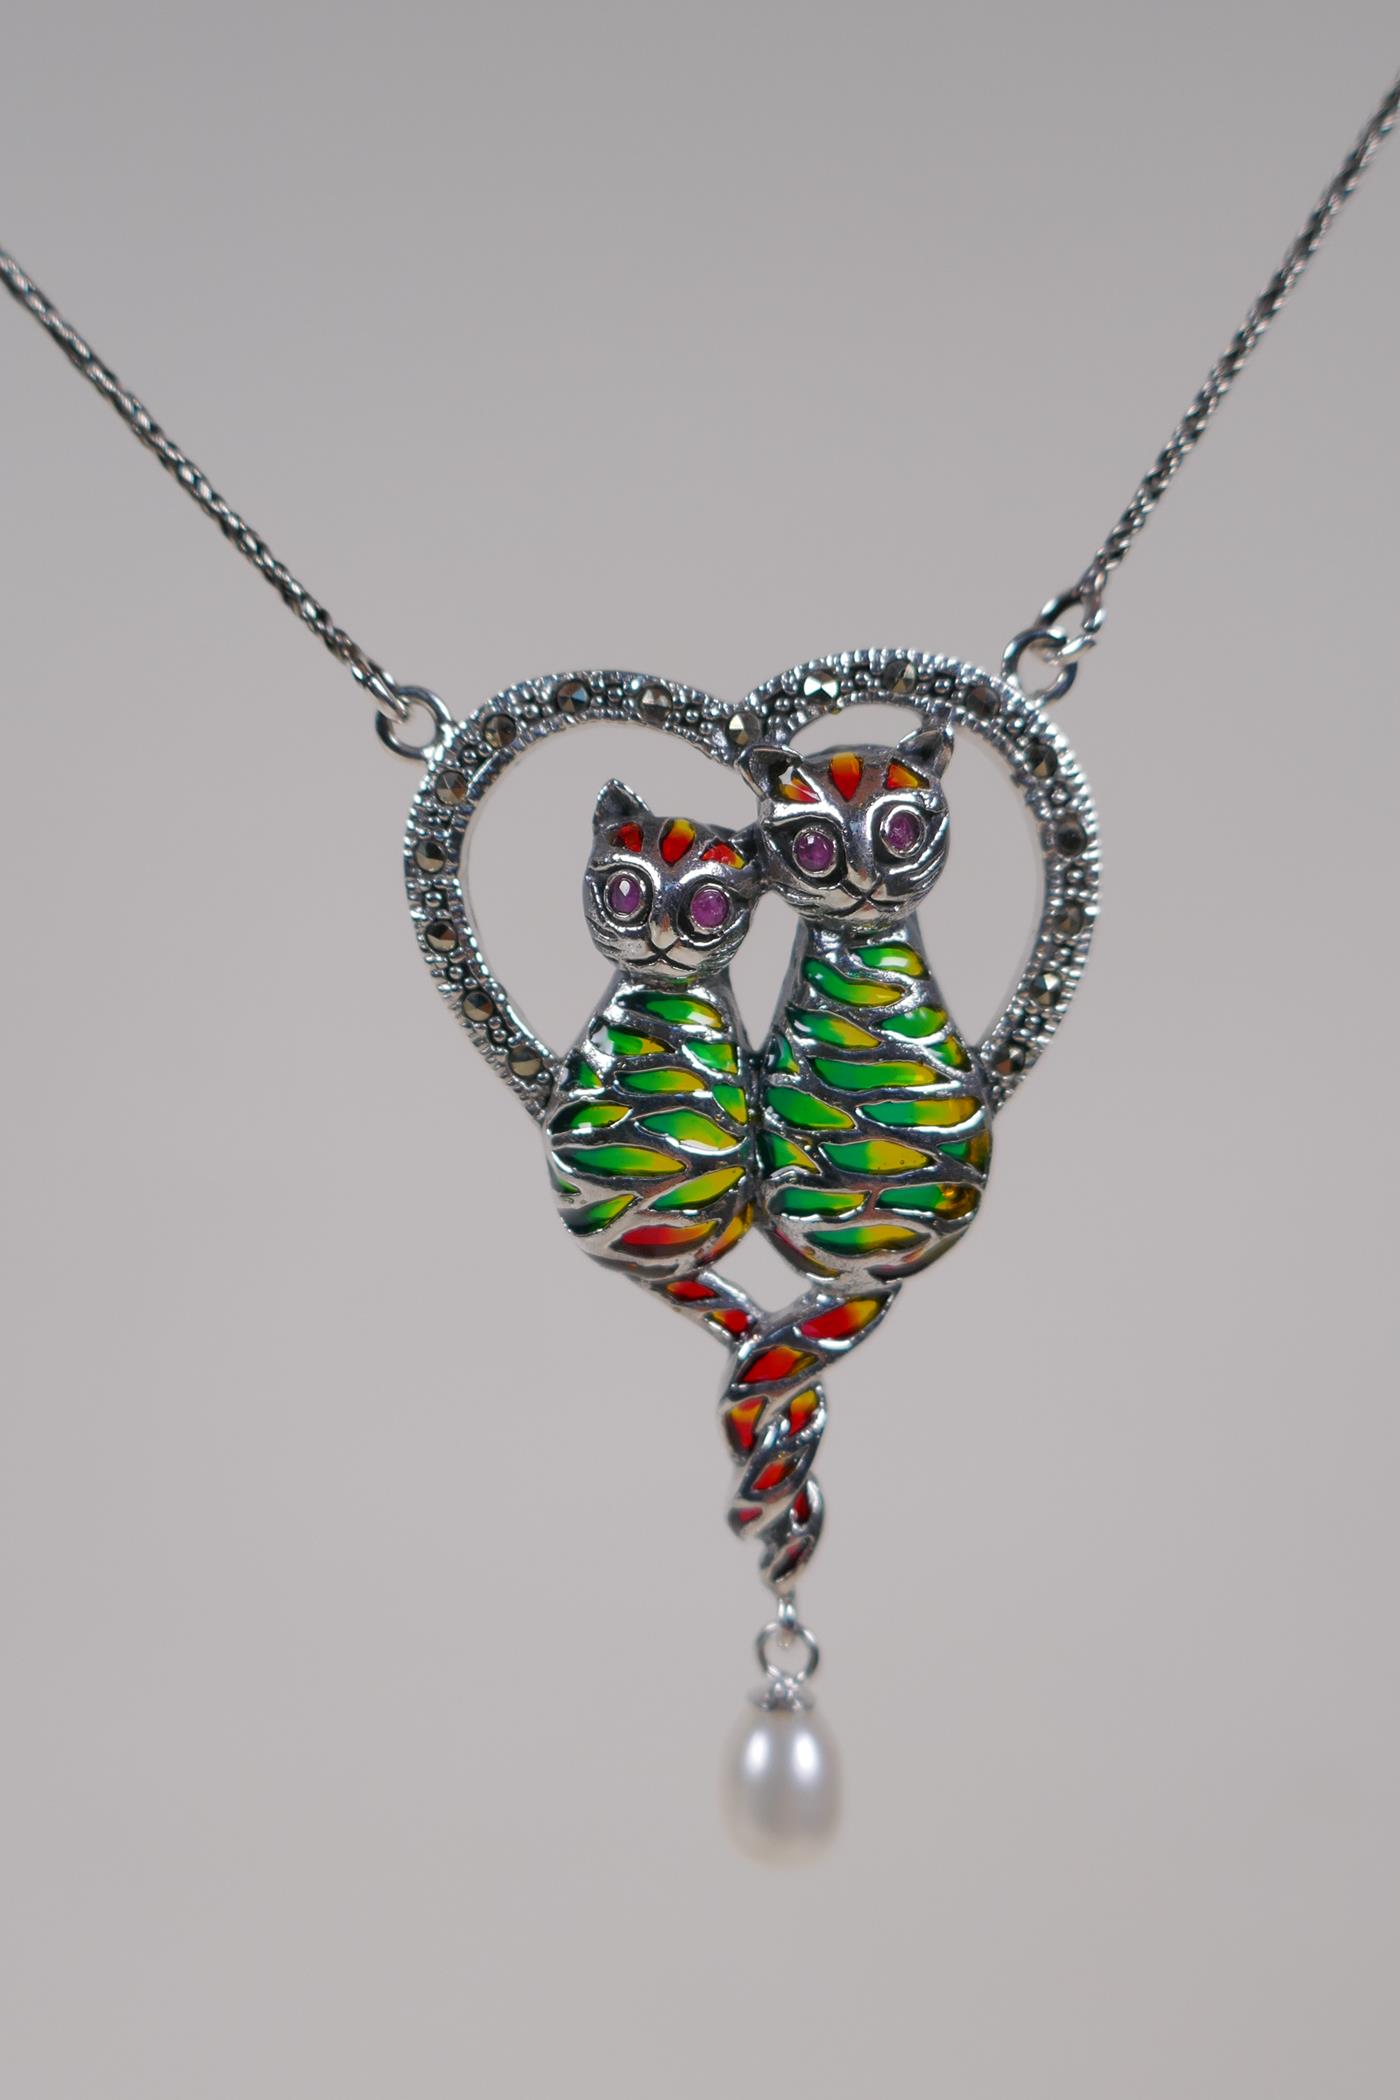 A 925 silver and plique a jour pendant necklace in the form of two cats within a heart, 5cm drop - Image 3 of 3